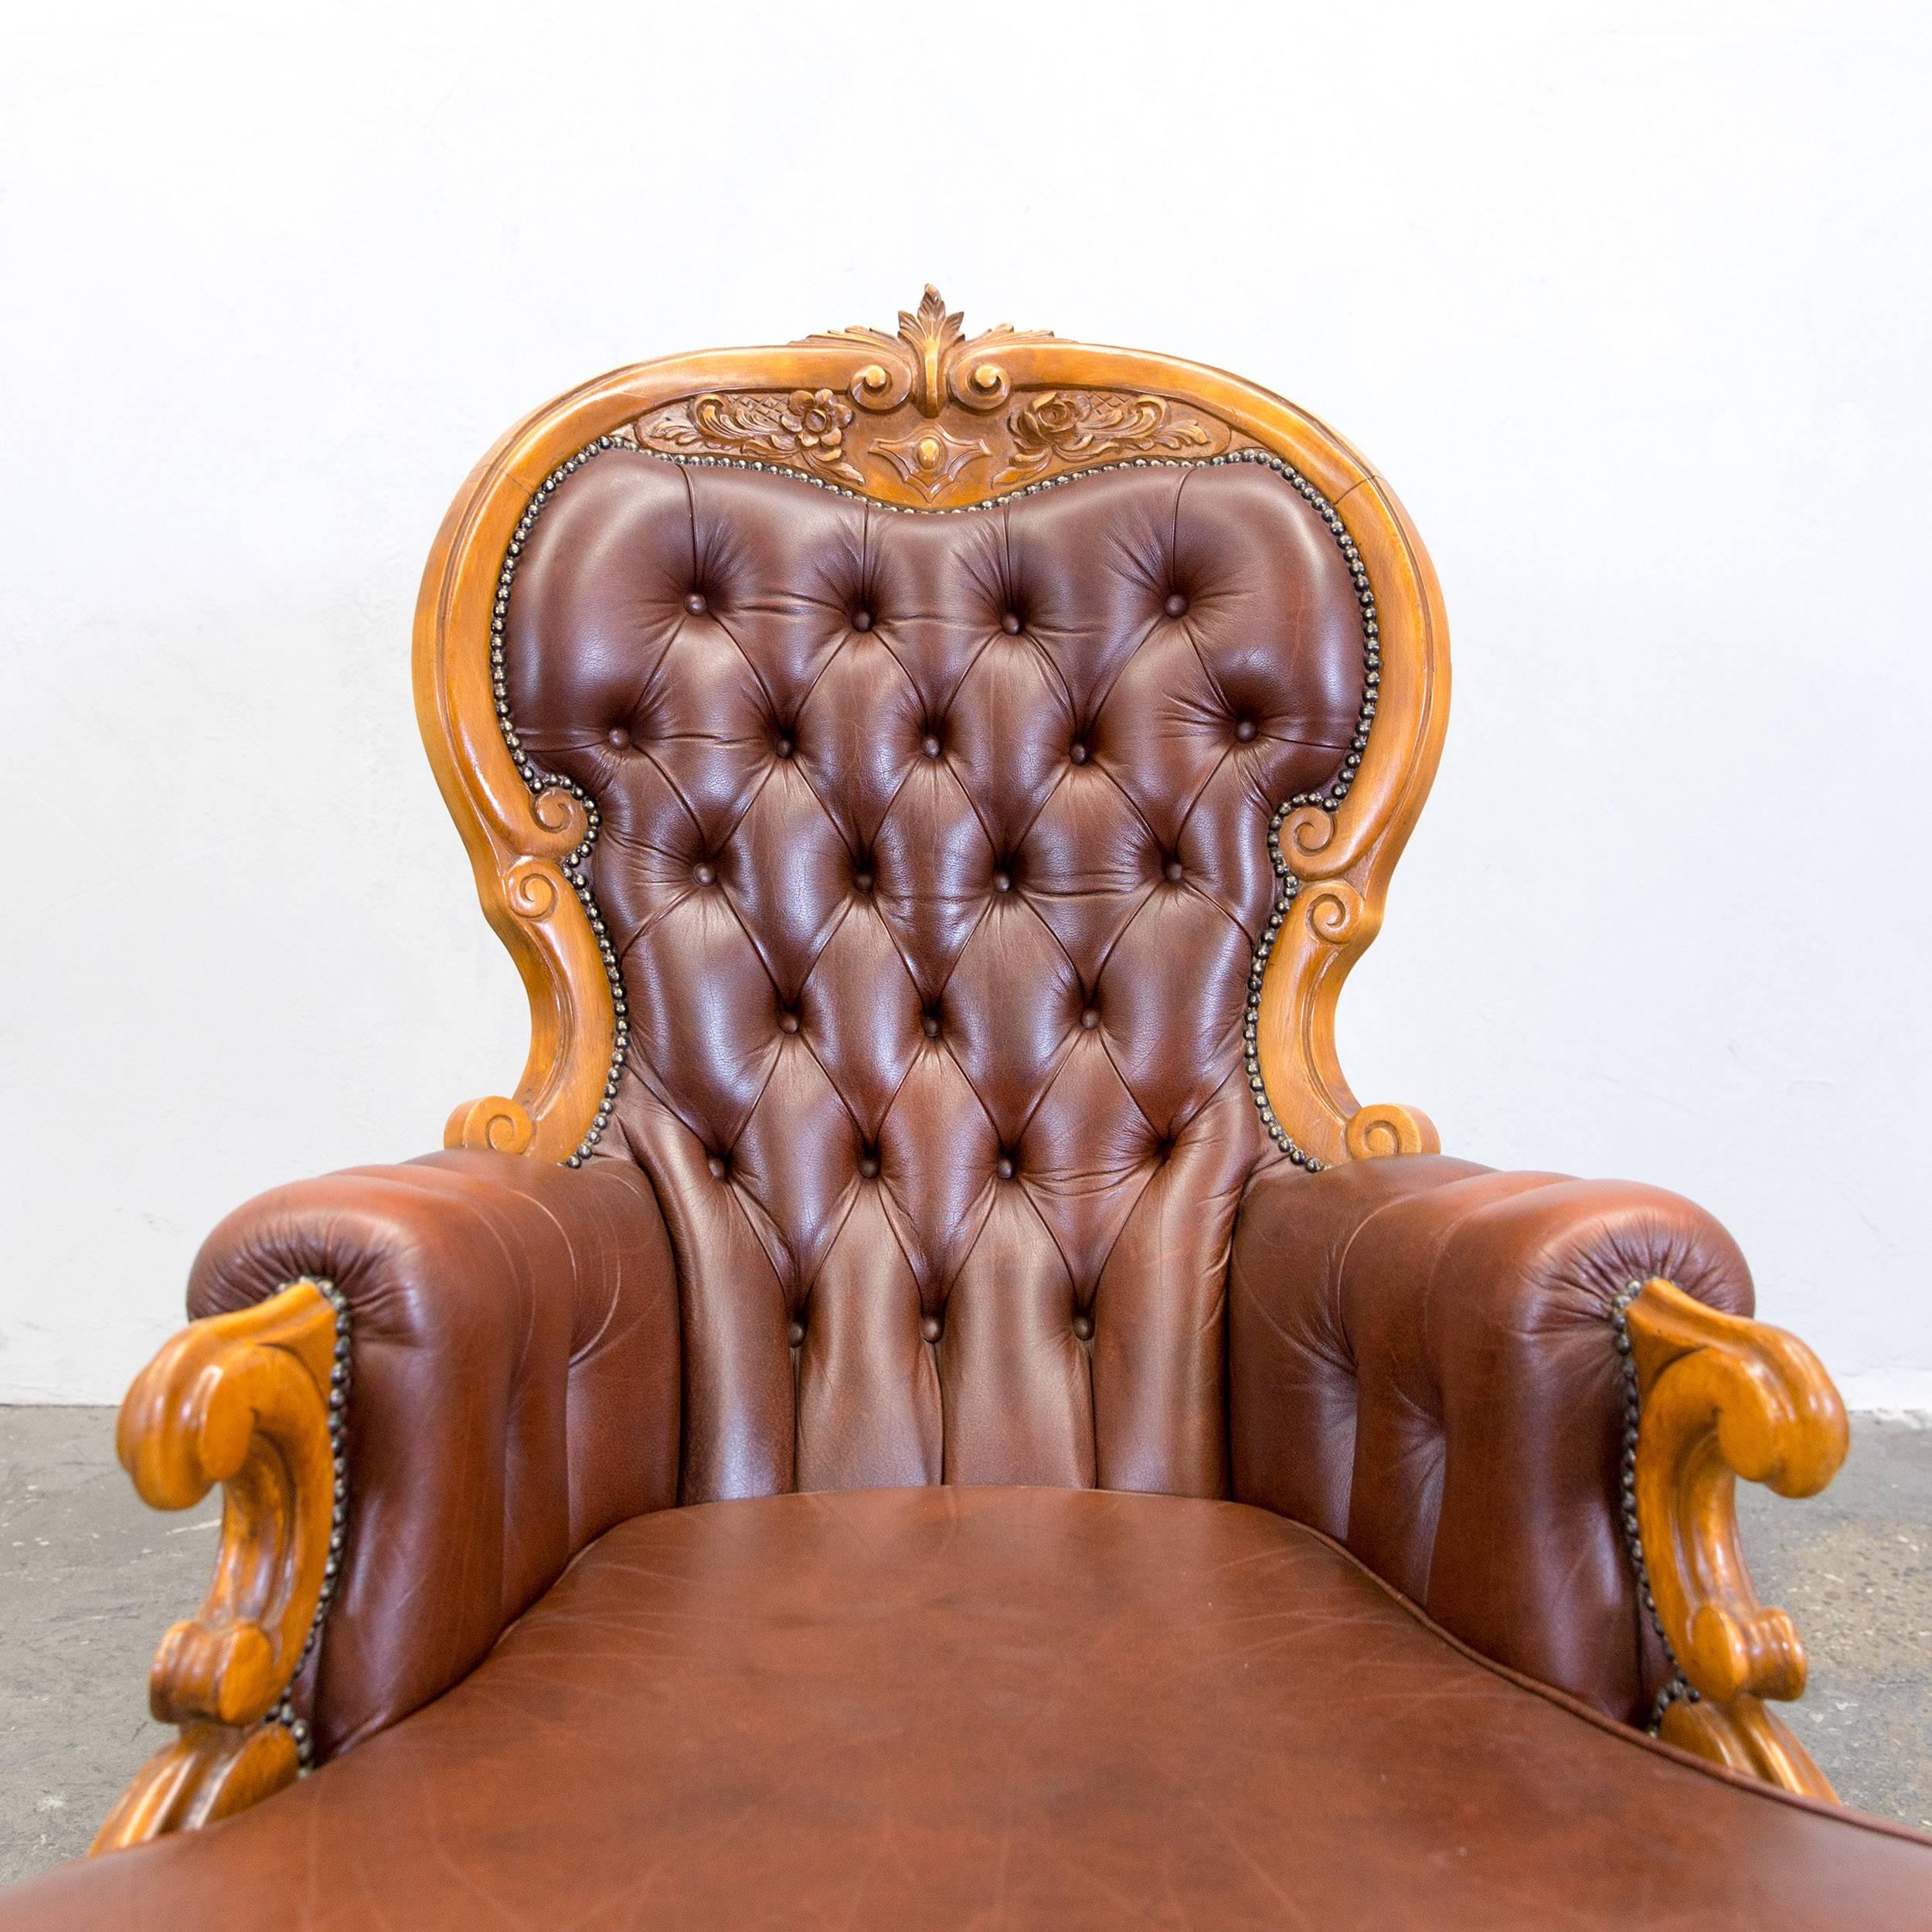 Chesterfield Brown Leather Armchair, One-Seat Wood Barock Retro In Good Condition For Sale In Cologne, DE